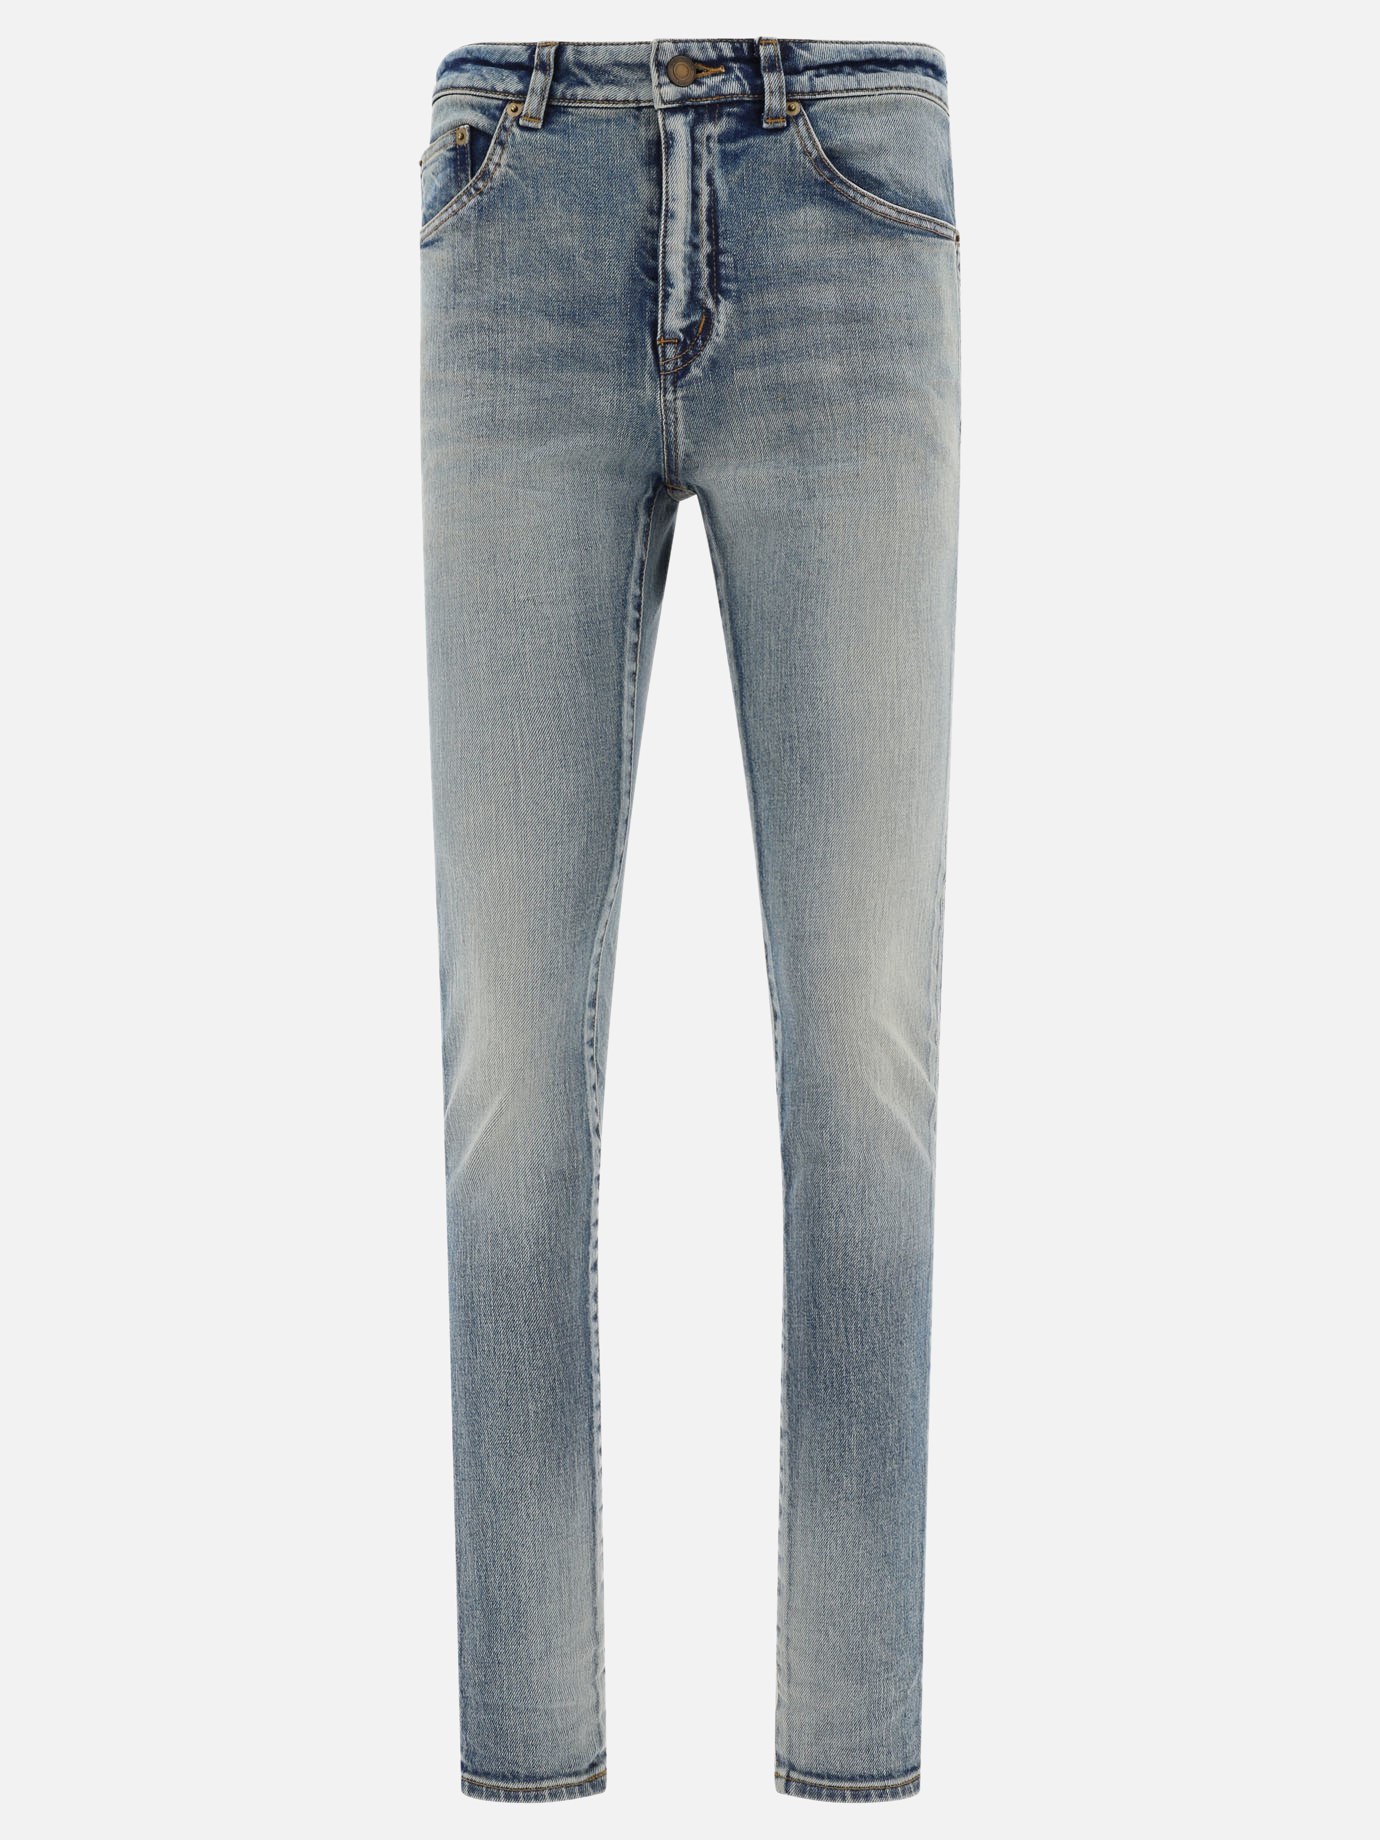 Washed out jeansby Saint Laurent - 2